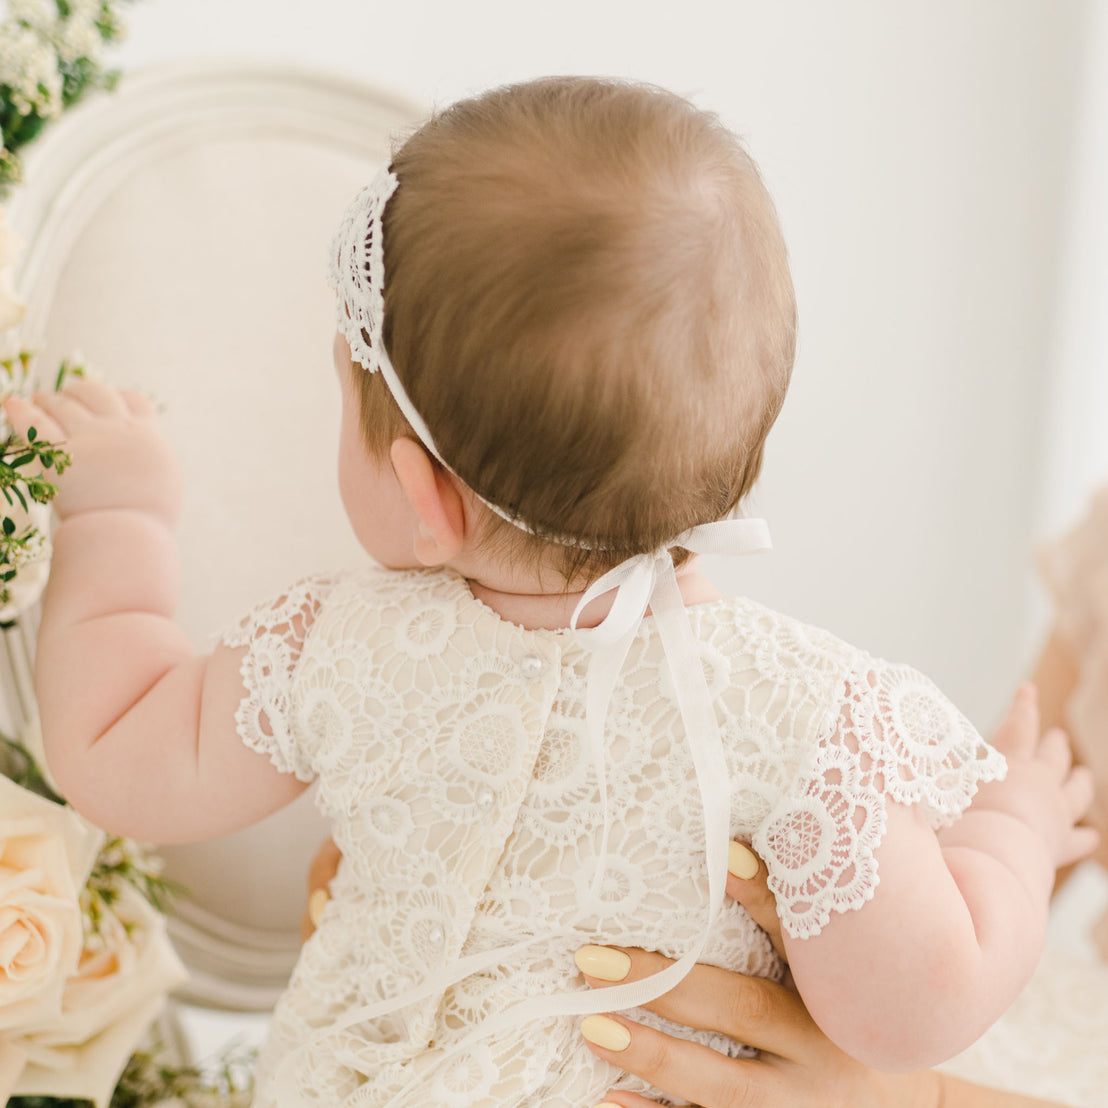 Detail of the back of baby's head wearing the large christening headband.